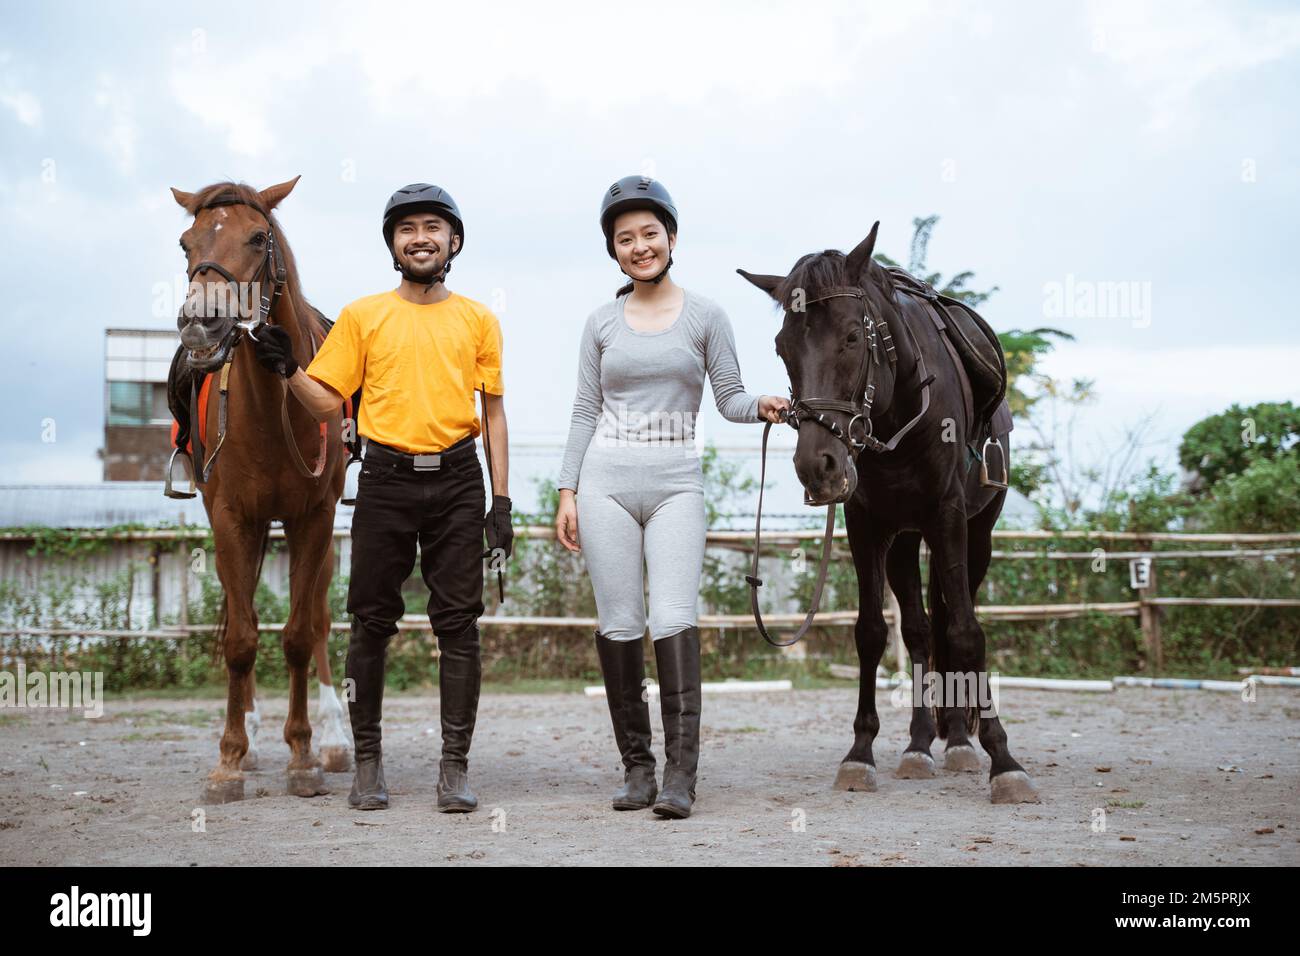 Two equestrian athletes wearing gear standing next to their horses Stock Photo